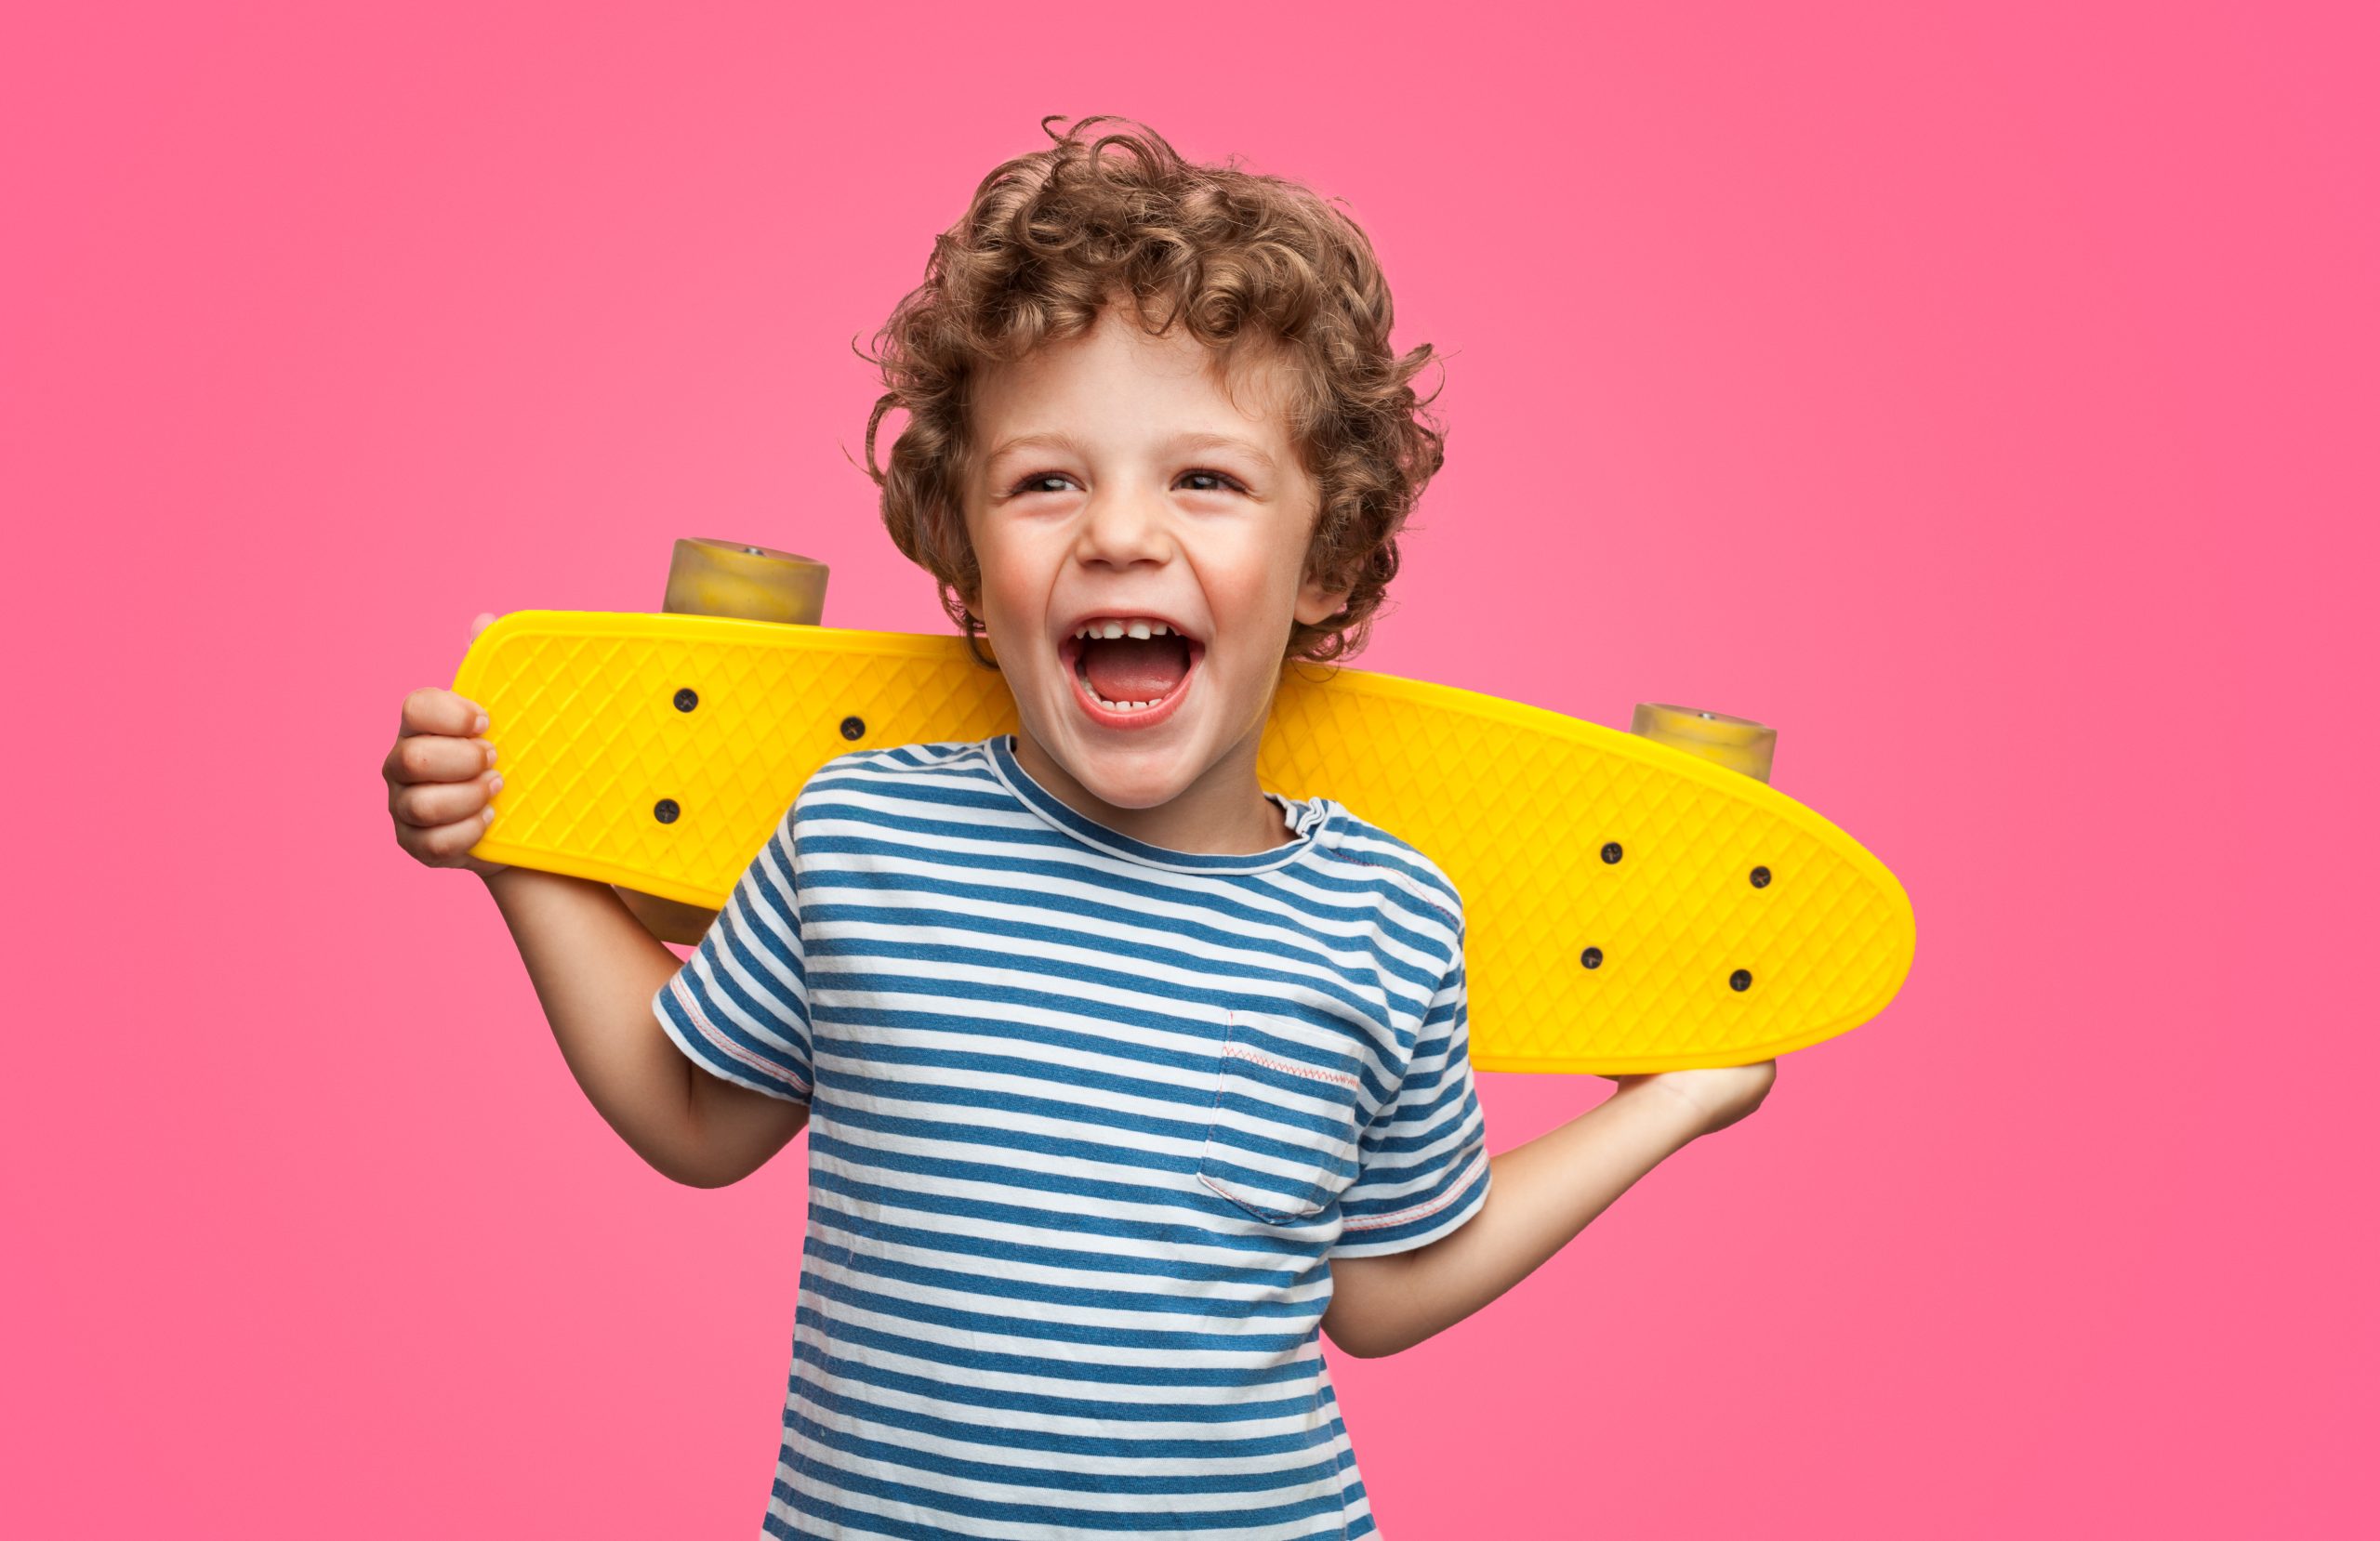 A very young curly haired child is holding a bright yellow skateboard across his shoulders. There is a pink background